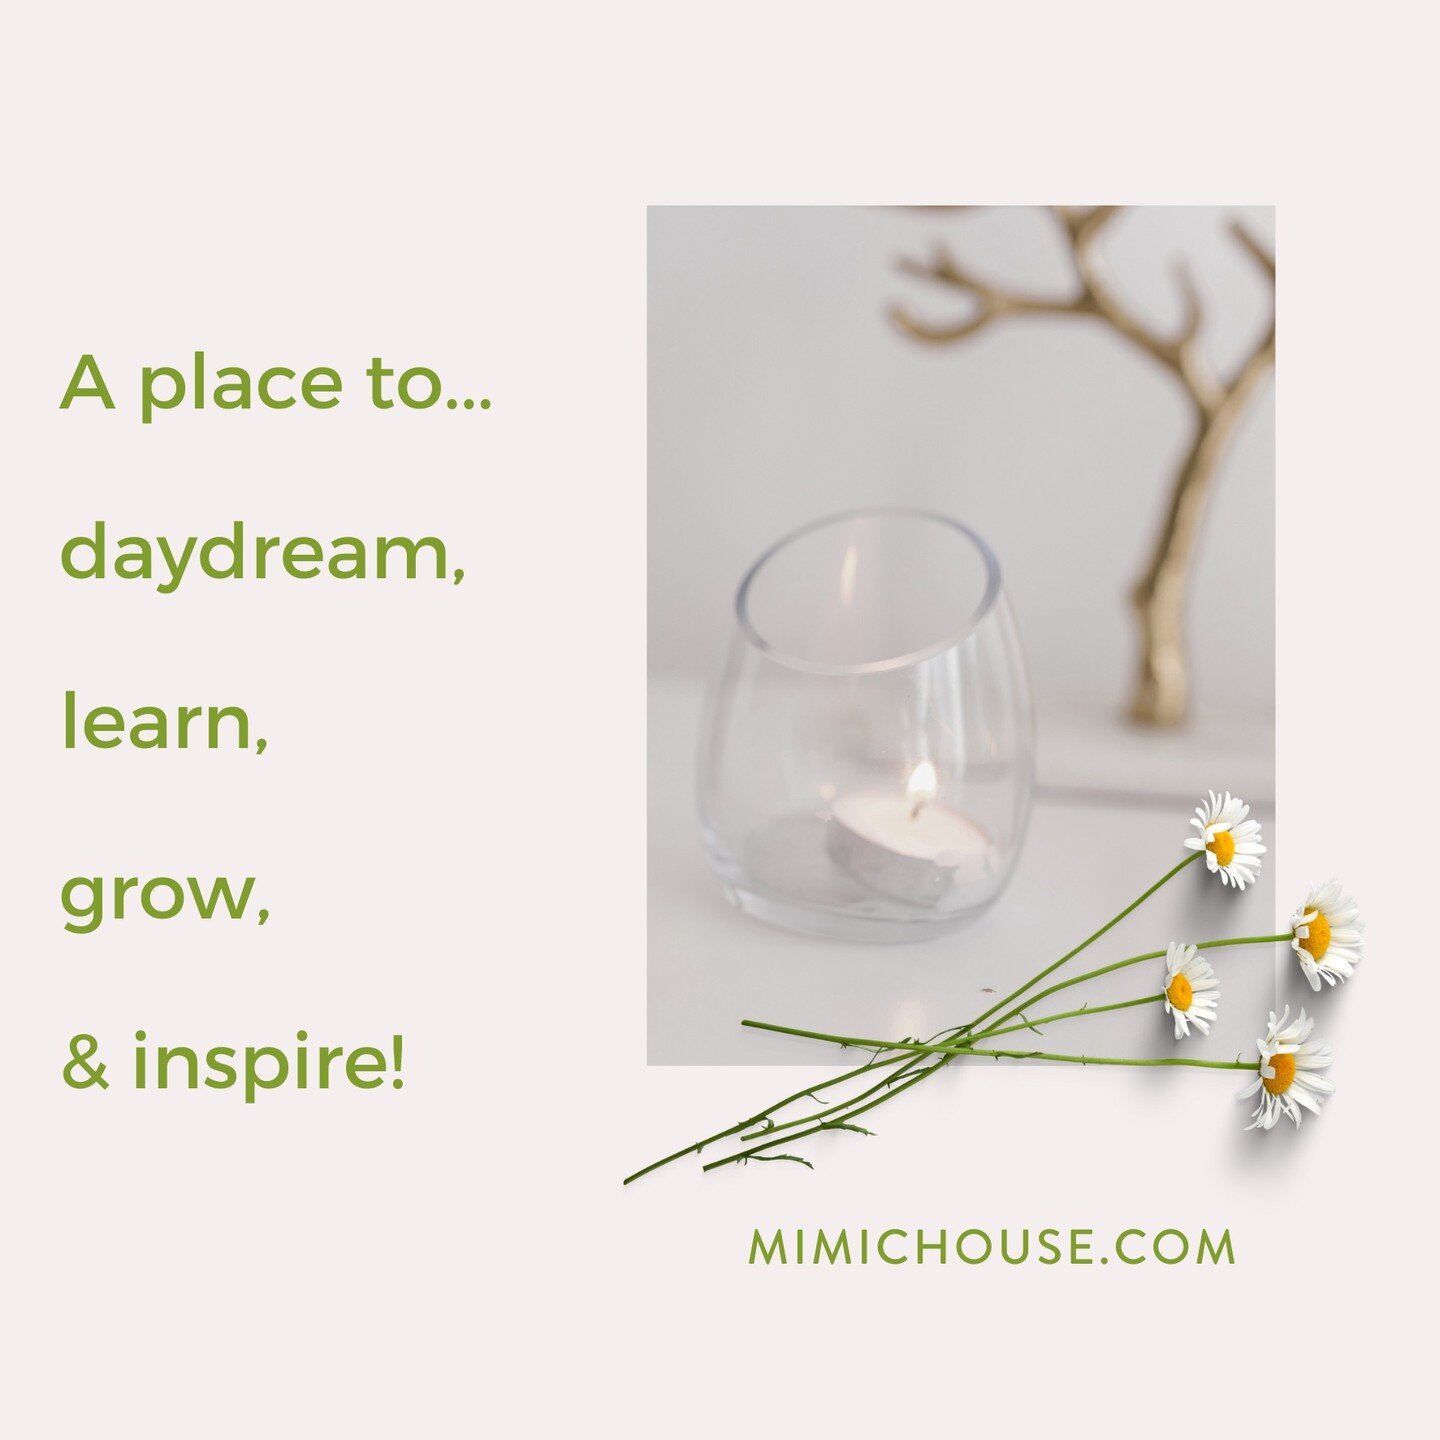 Need I say more! 
Come on over to https://www.mimichouse.com/

#happy #freshideas #blog #fengshui #homedecorating #naturelovers #hippiestyle #karma #peaceful